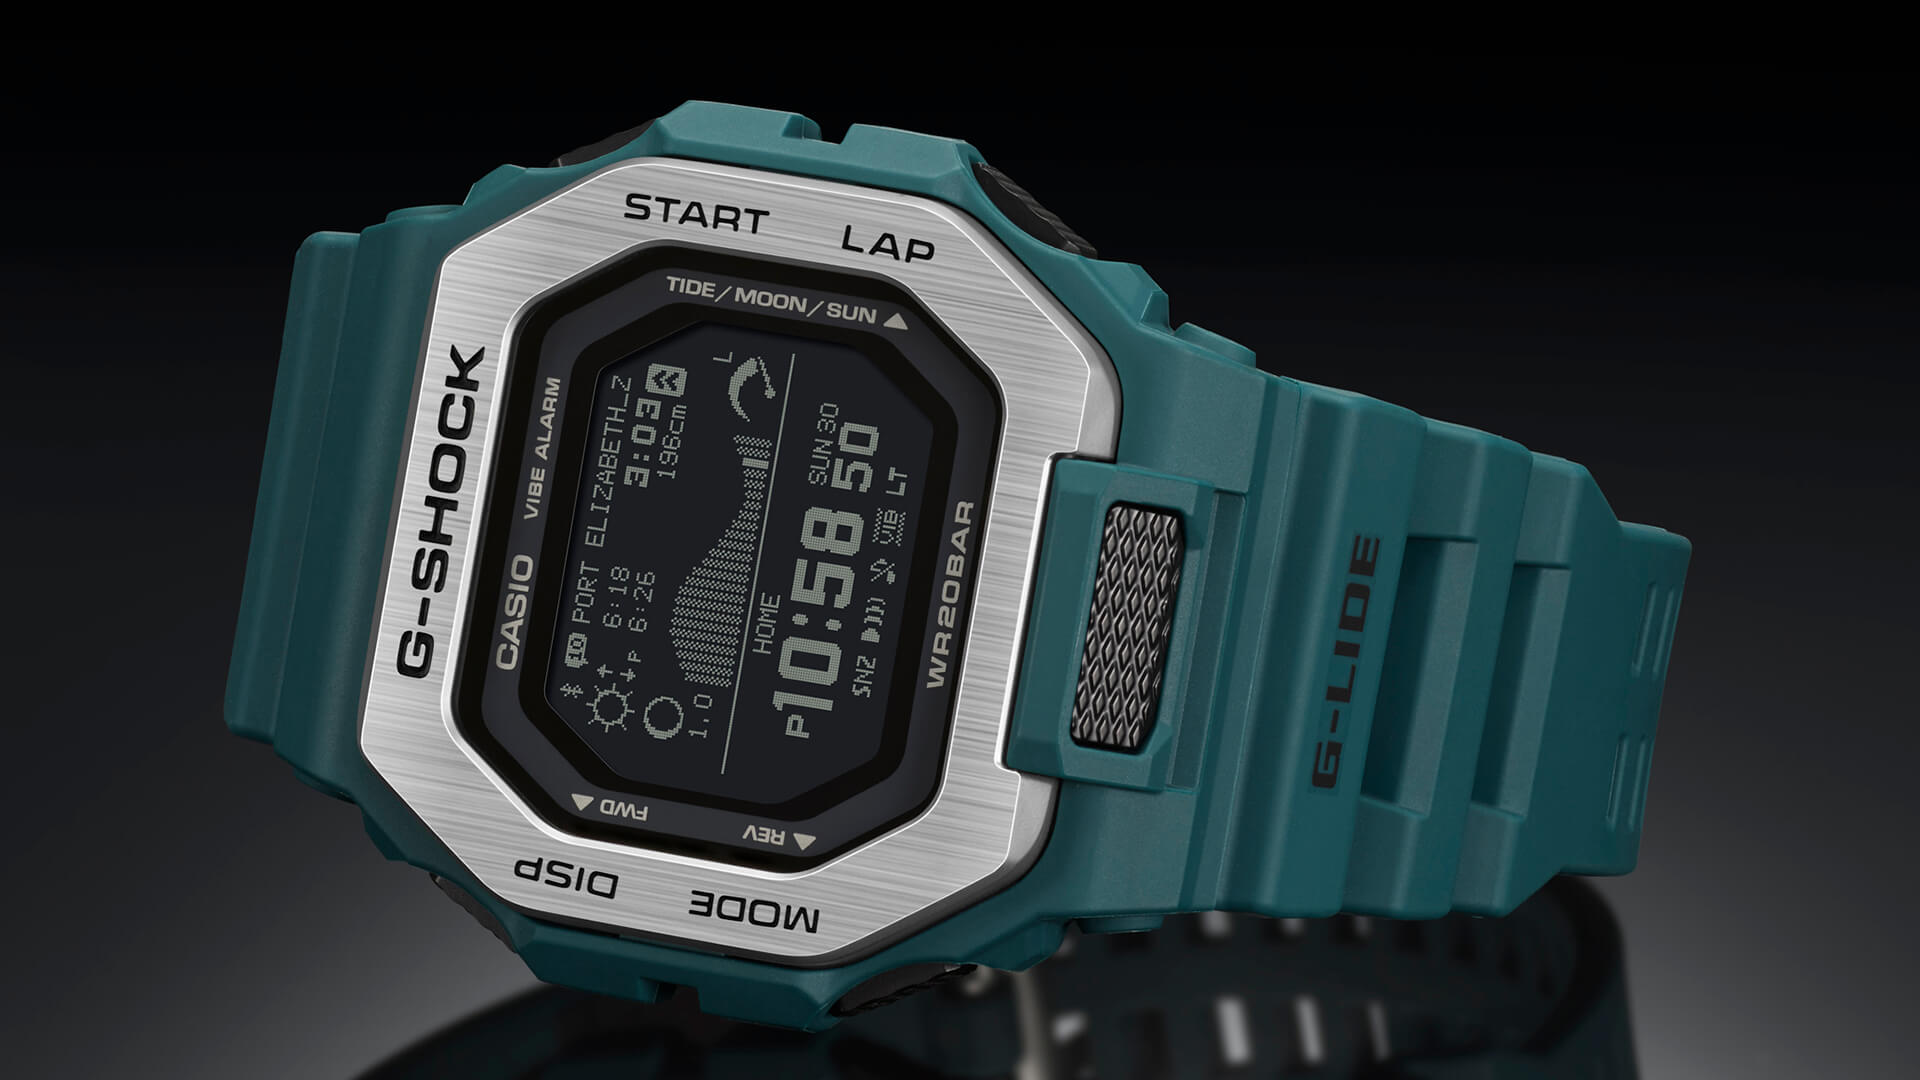 Casio Updates G Shock G Lide Series With Three New Models Designed For Surfers Ablogtowatch